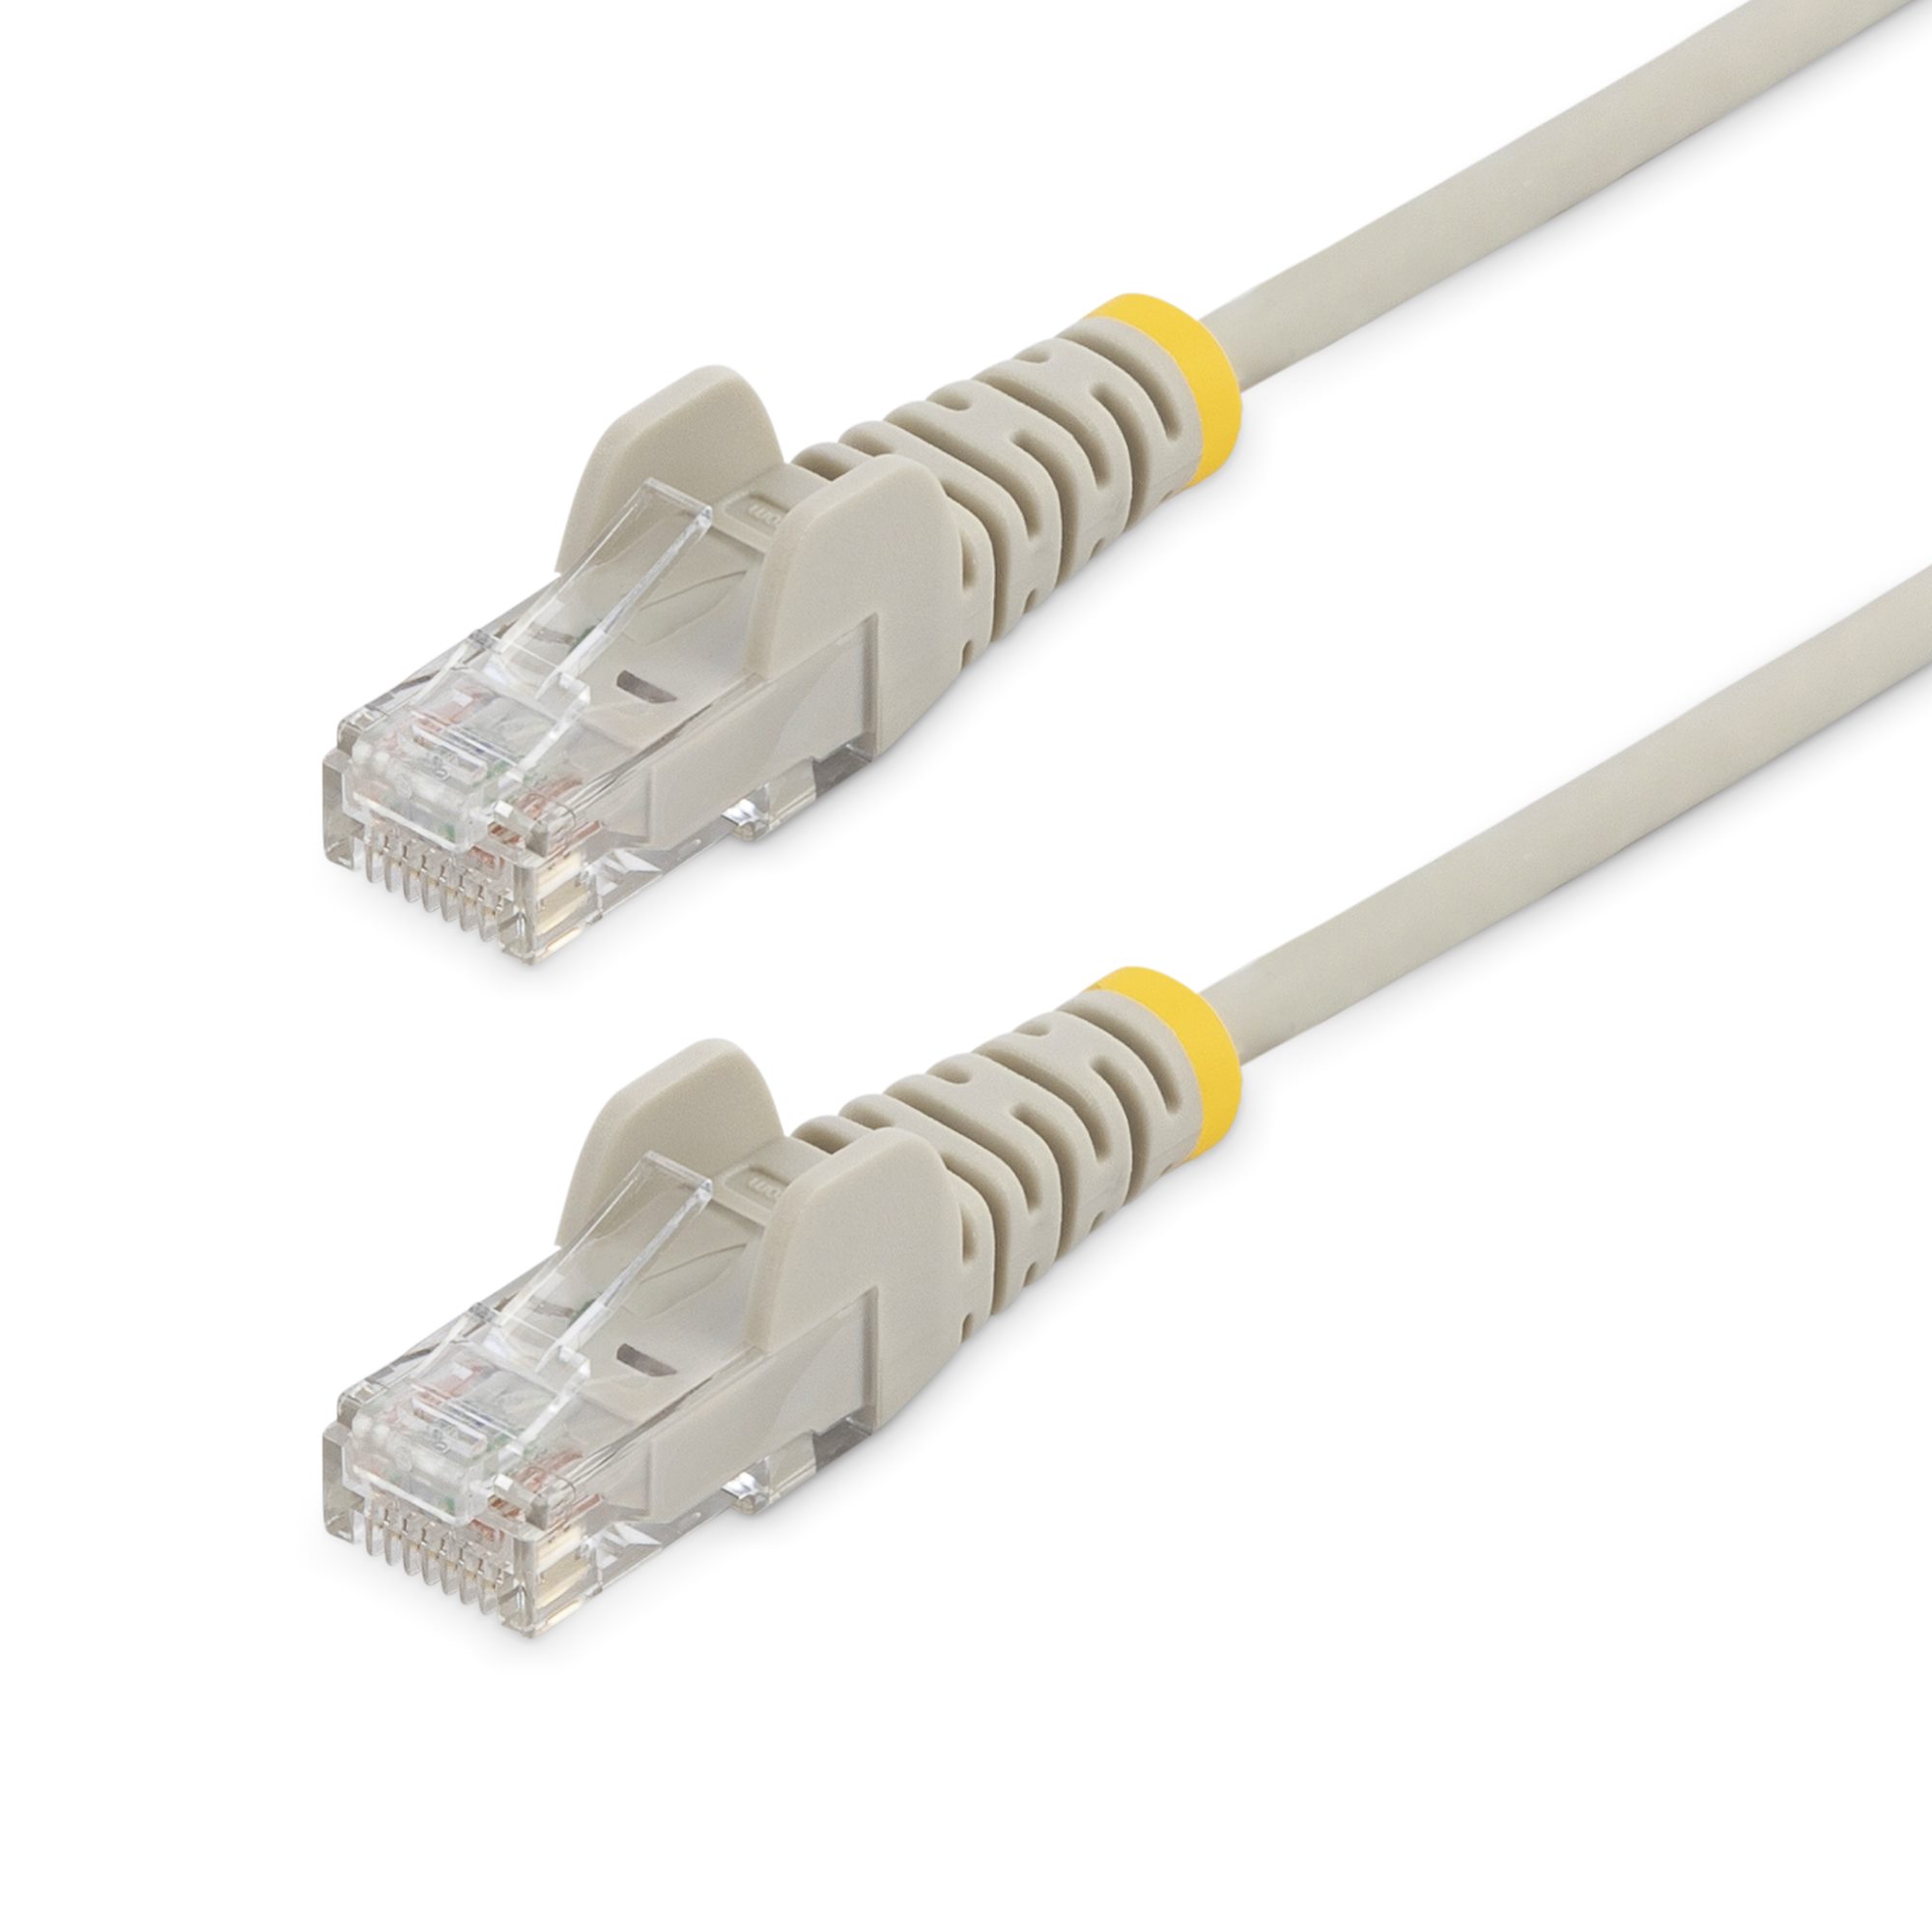 Cable - Grey Slim CAT6 Patch Cord 3m - Slim Cat 6 Cables, Cables